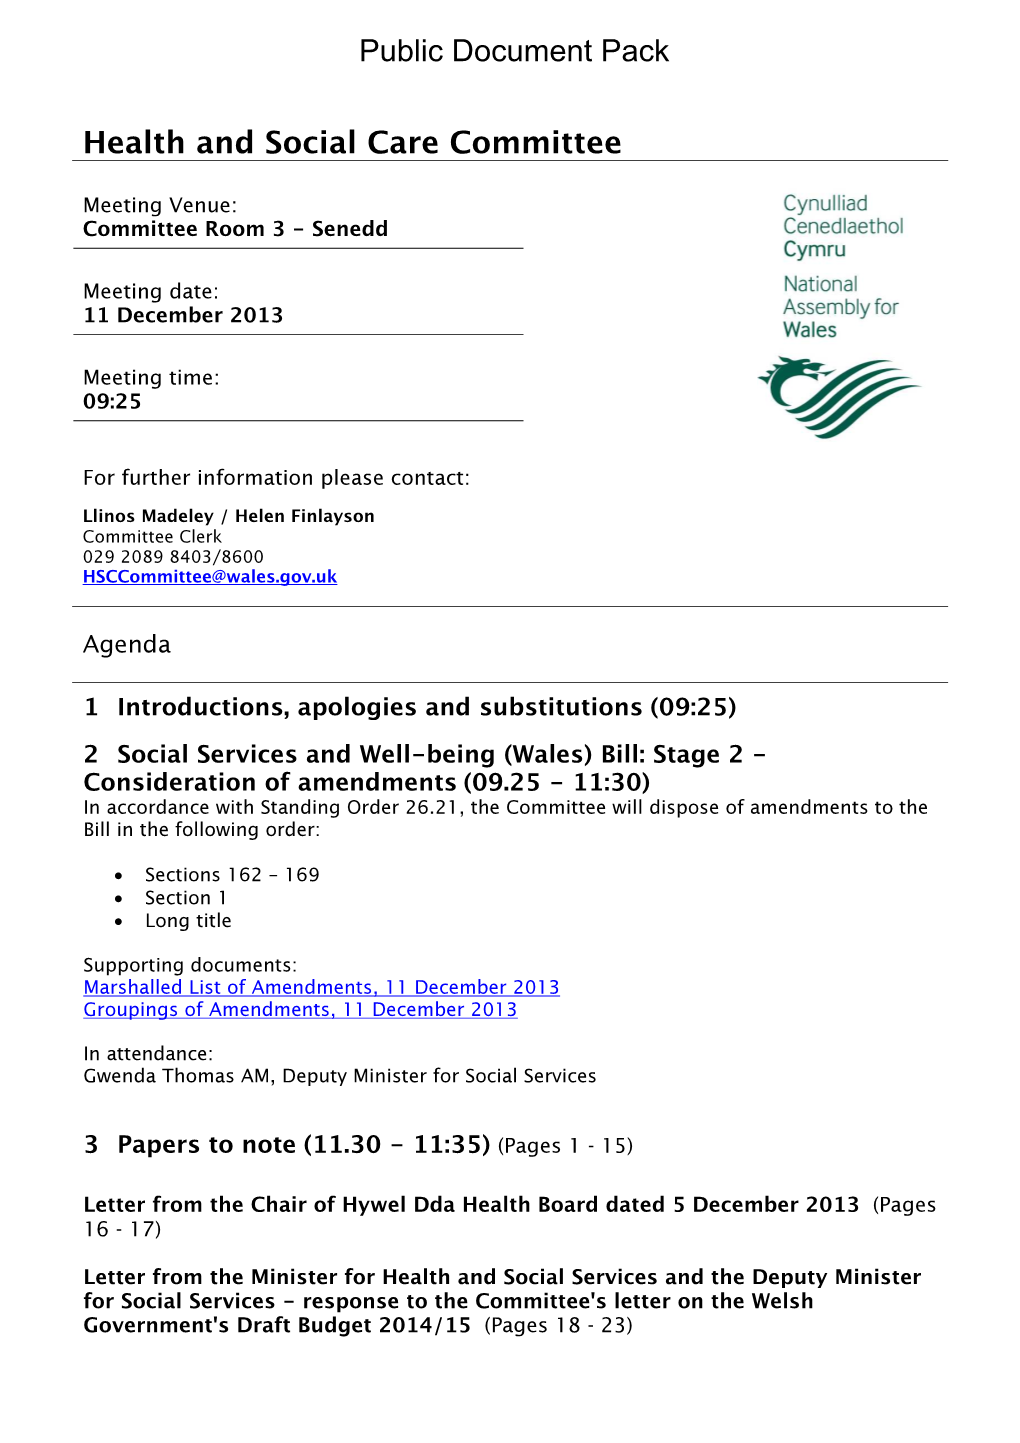 Health and Social Care Committee Public Document Pack